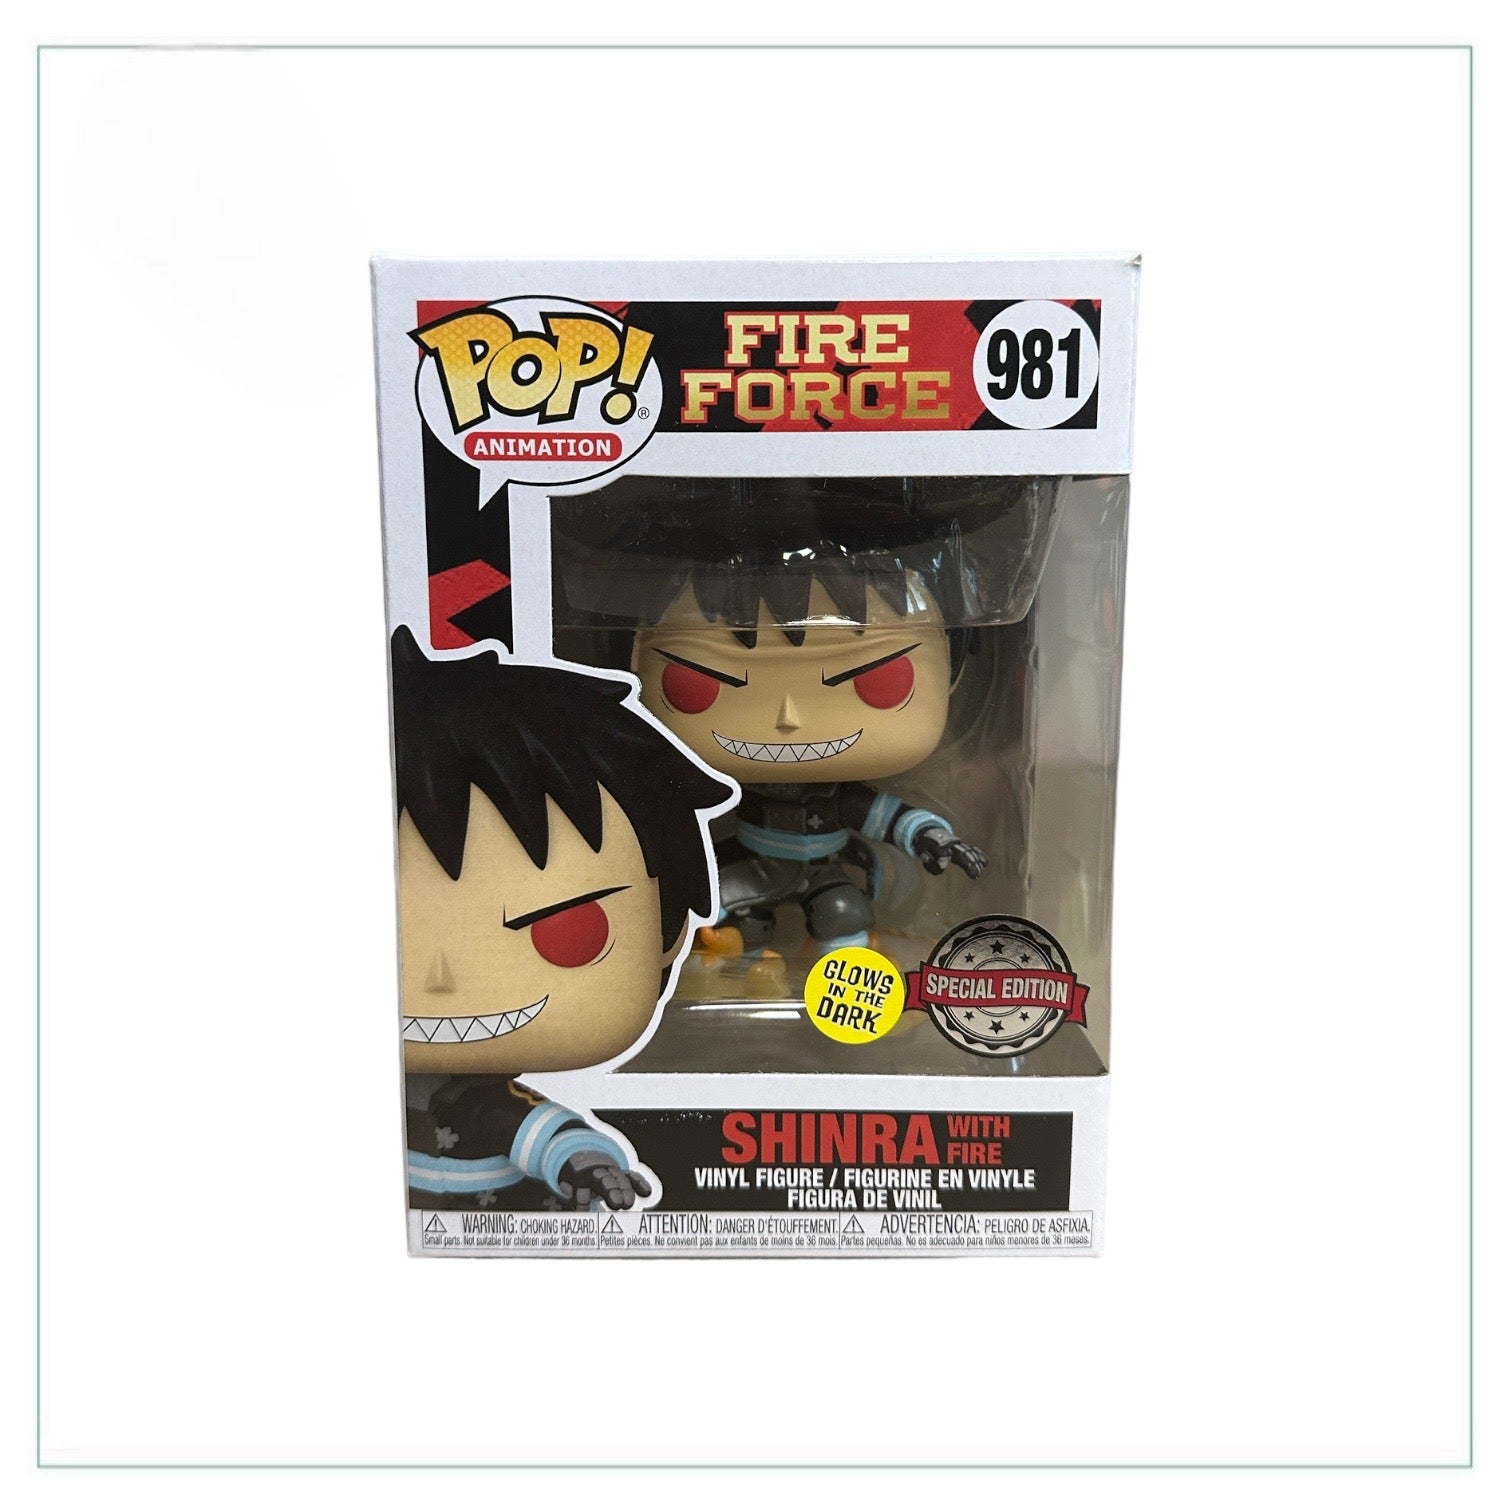 Shinra with Fire #981 (Glows in the Dark) Funko Pop! - Fire Force - Special Edition